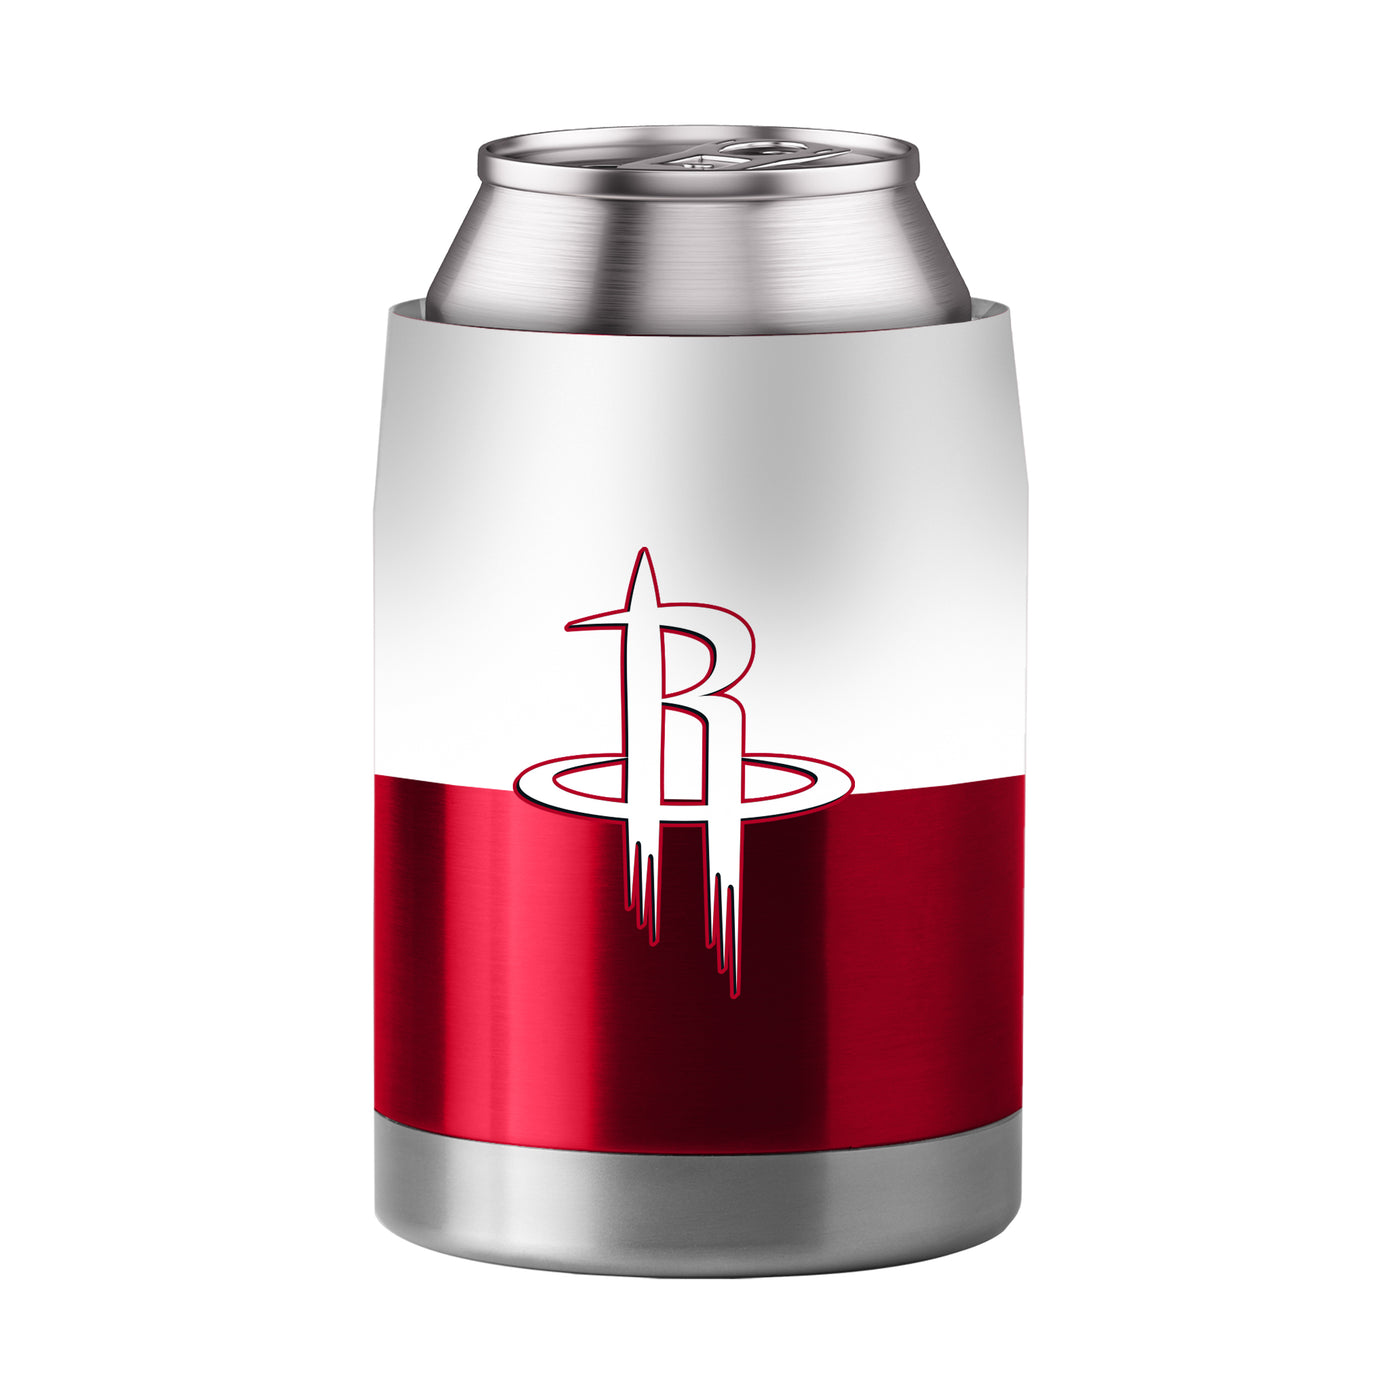 Houston Rockets Colorblock 3-in-1 Coolie